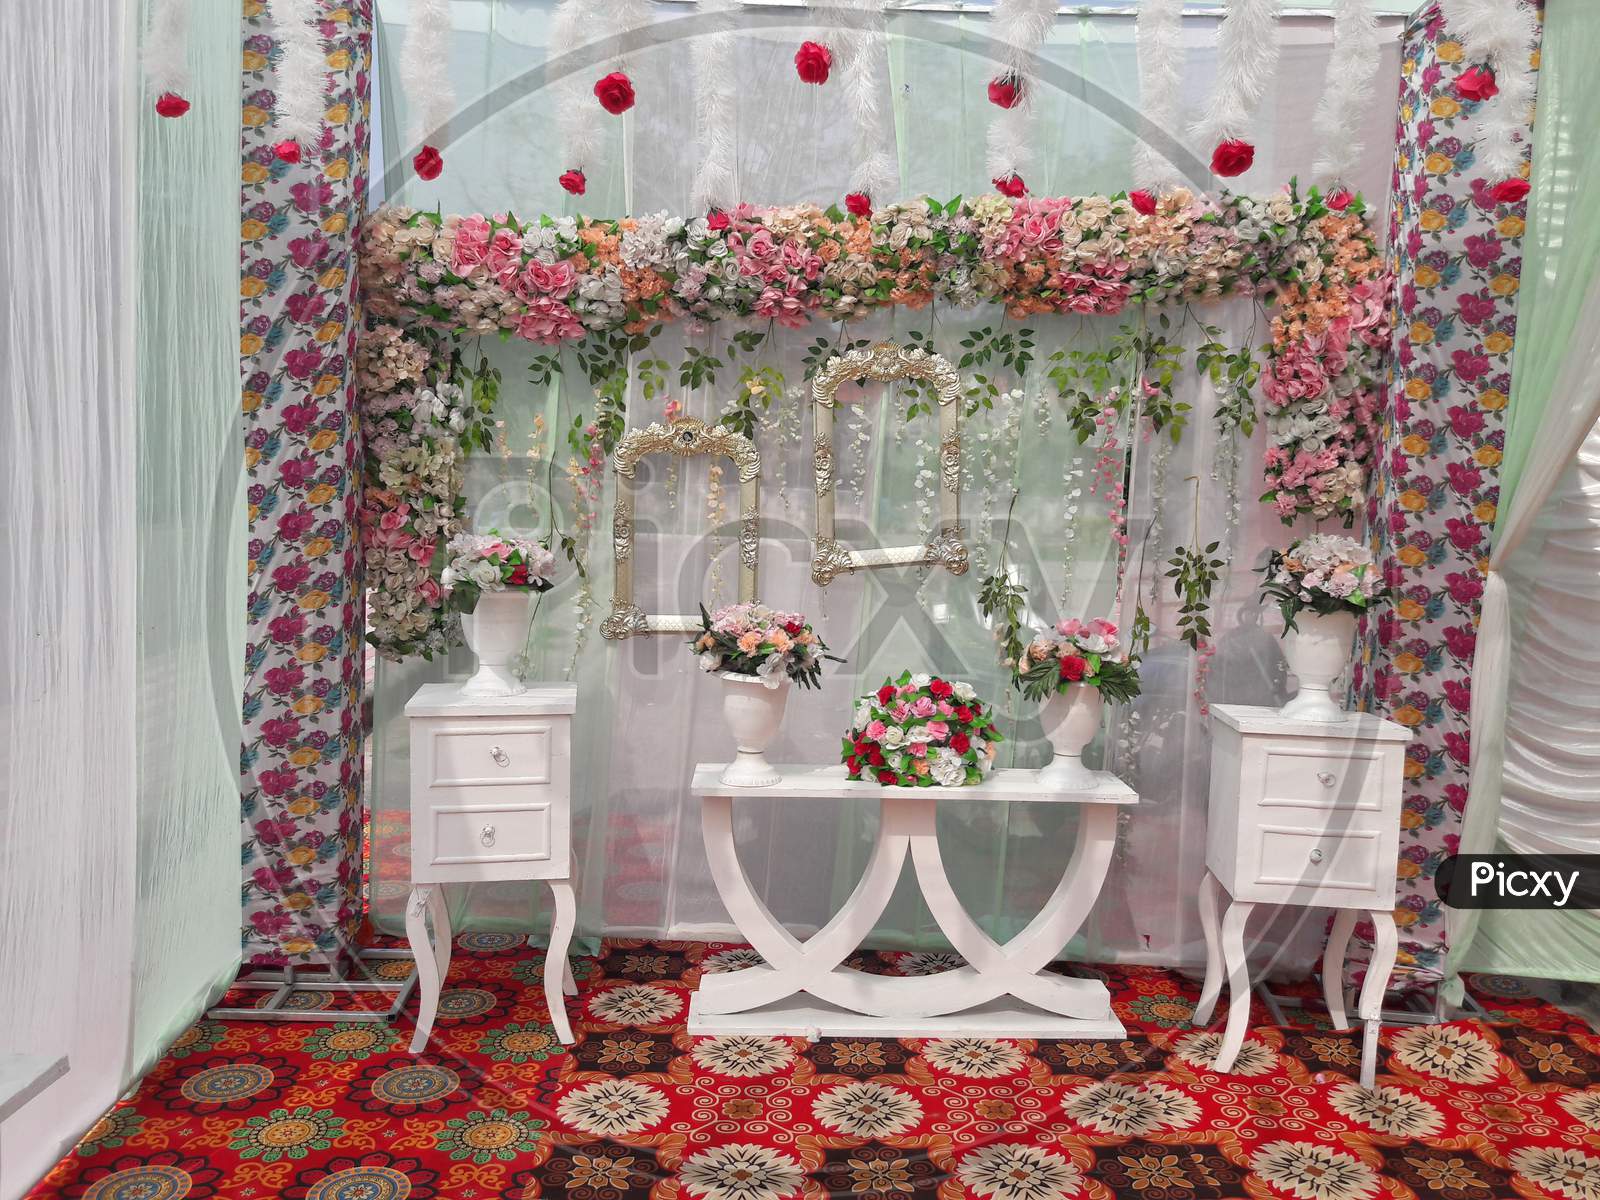 Decoration With fresh Flowers At an Indian Wedding